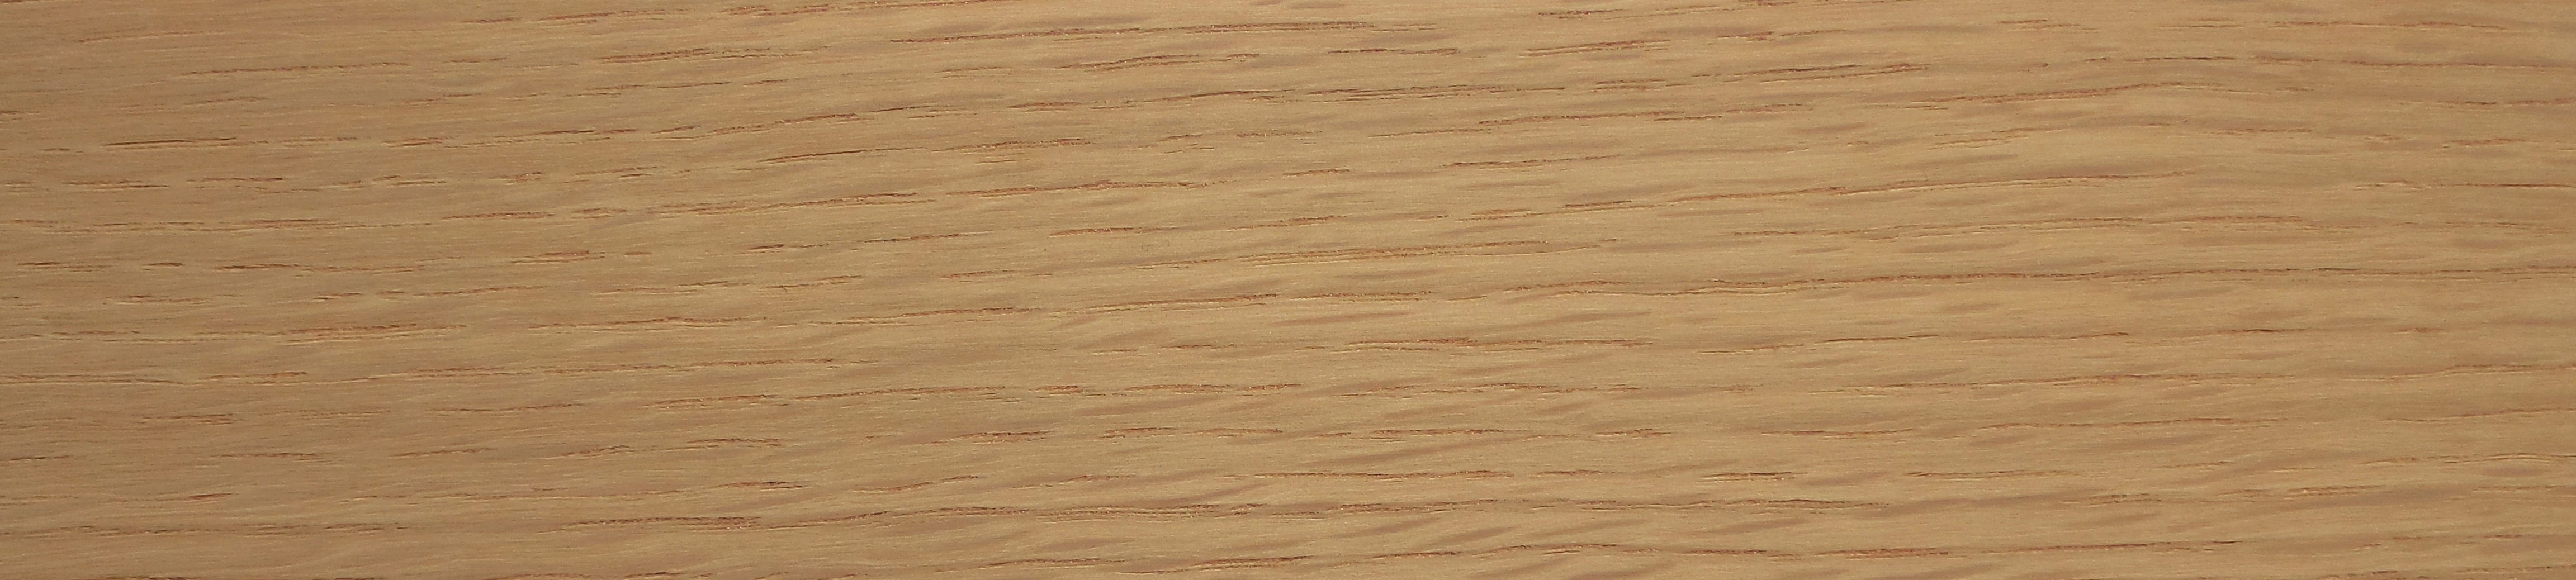 American White Oak Thickwood Unglued Edging / Lipping 50mm x 1mm Thick Oak Wood Edging